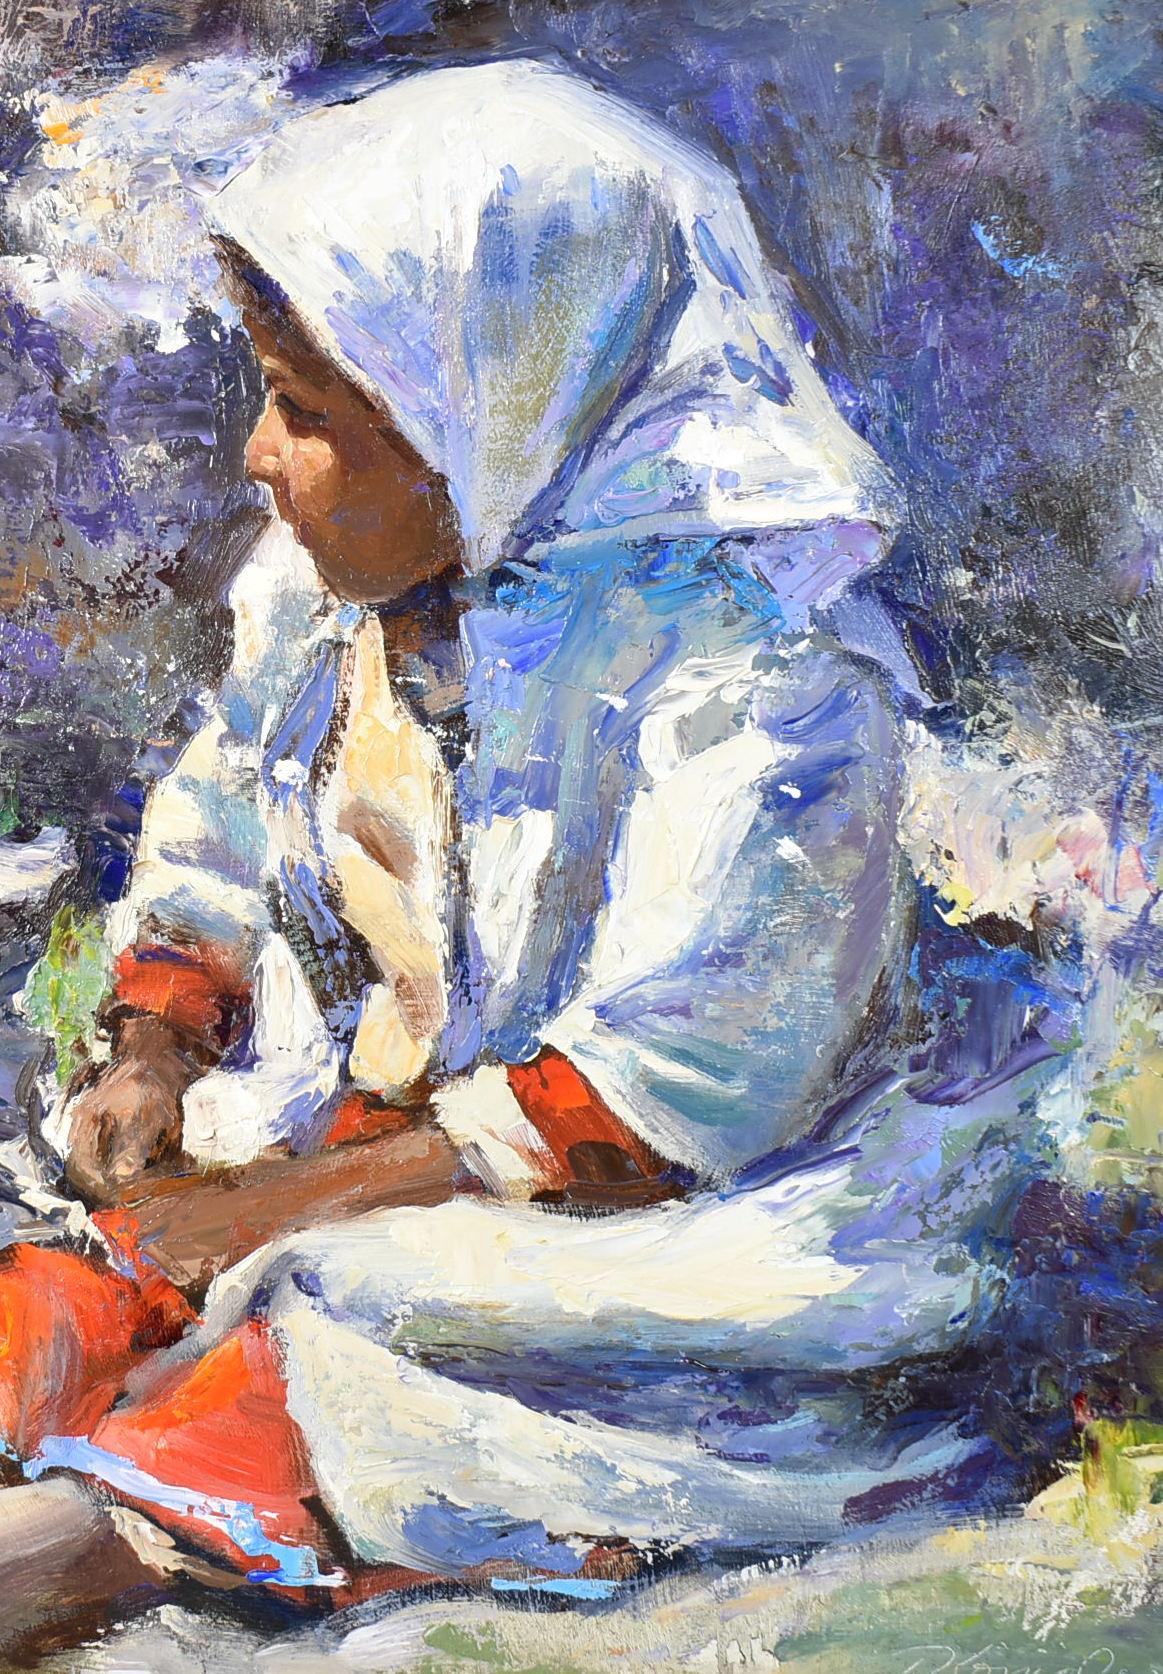 Native American girl oil painting, girl is seated wearing red dress with a white overcoat and head scarf. Blue and purple highlights in background. Framed with linen matting, a few marks on the frame. Oil painting in excellent condition. Image